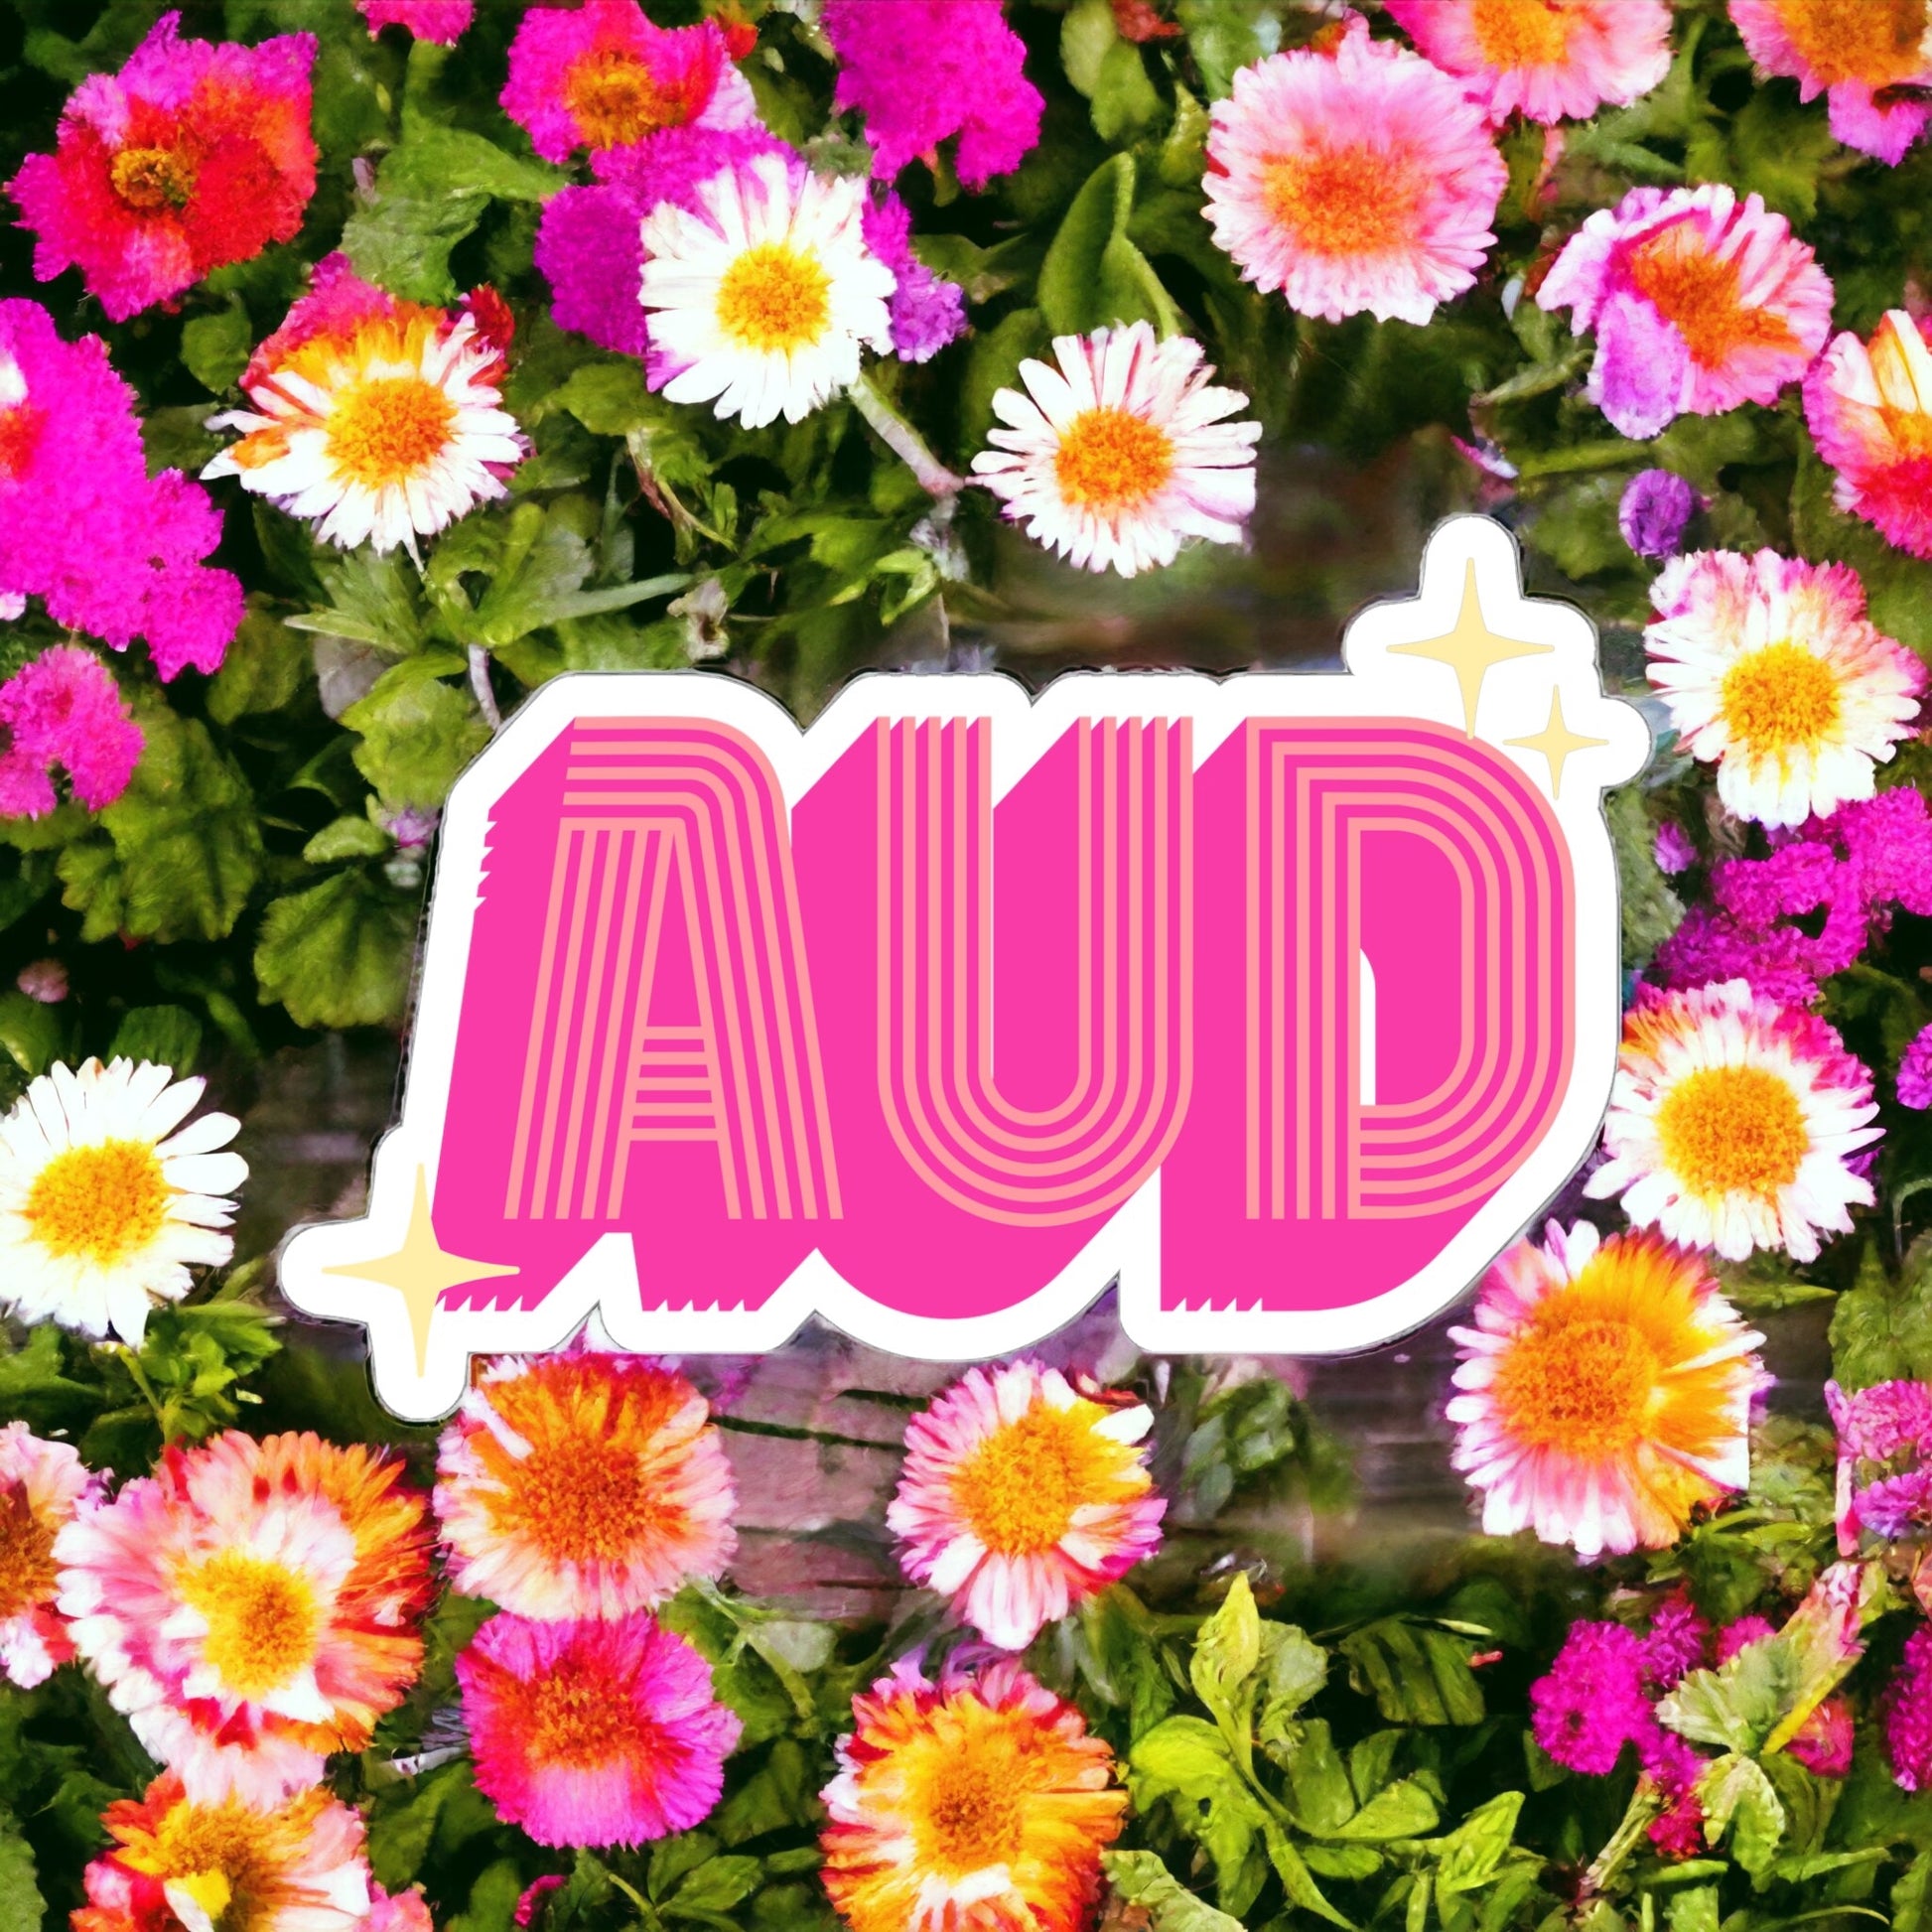 AUD Pink Retro Sticker for Audiologist, 2" 3" 4" or 5"